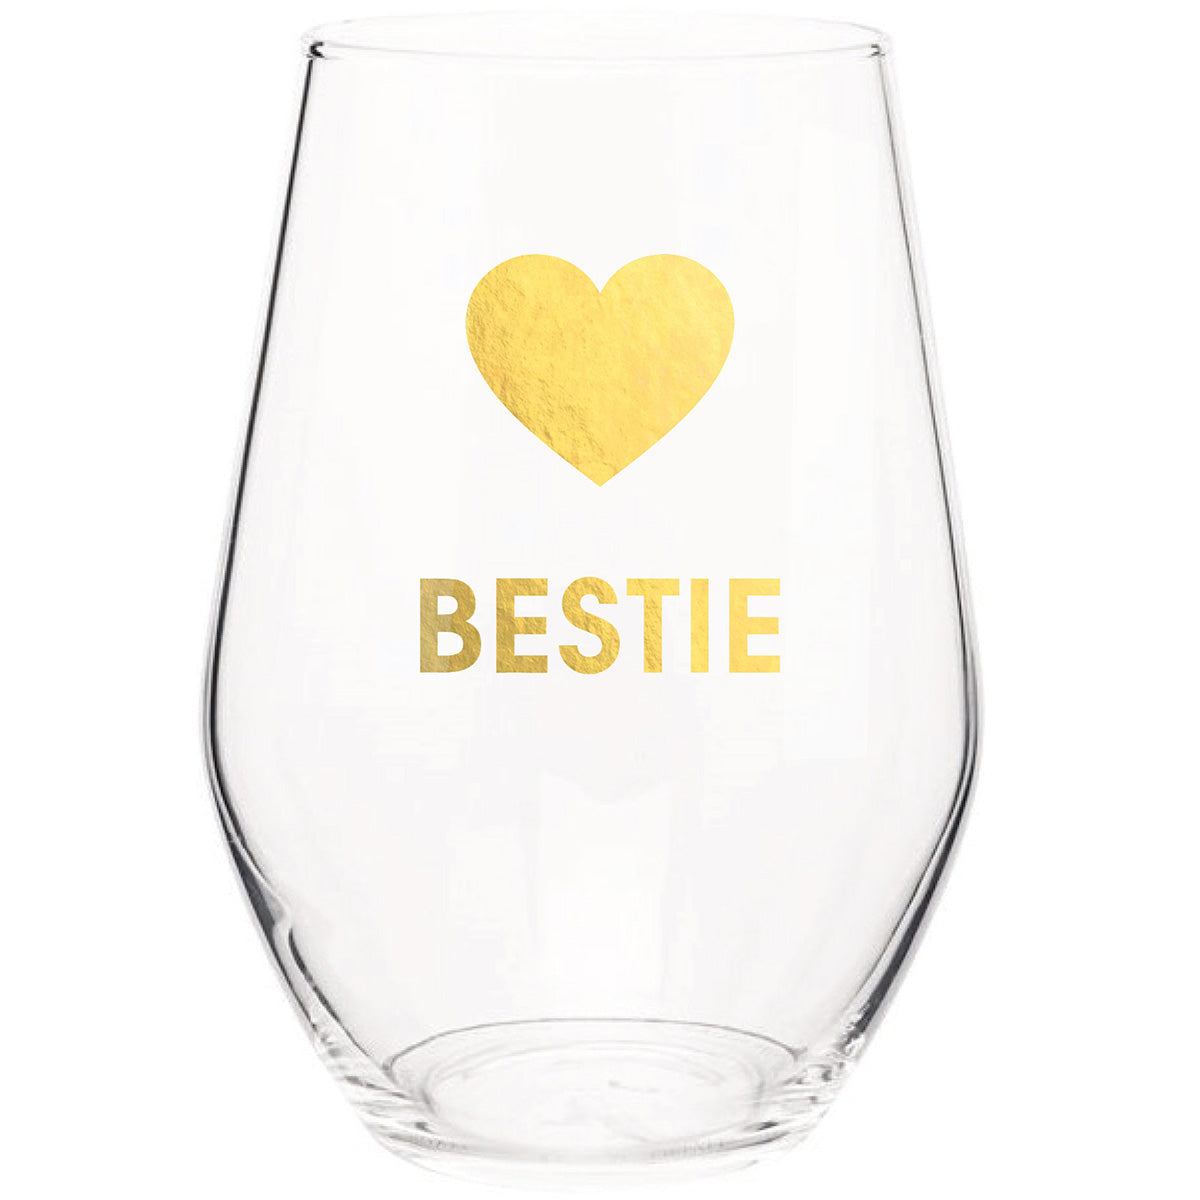 Bestie - Gold Foil Stemless Wine Glass (Slight Imperfections)